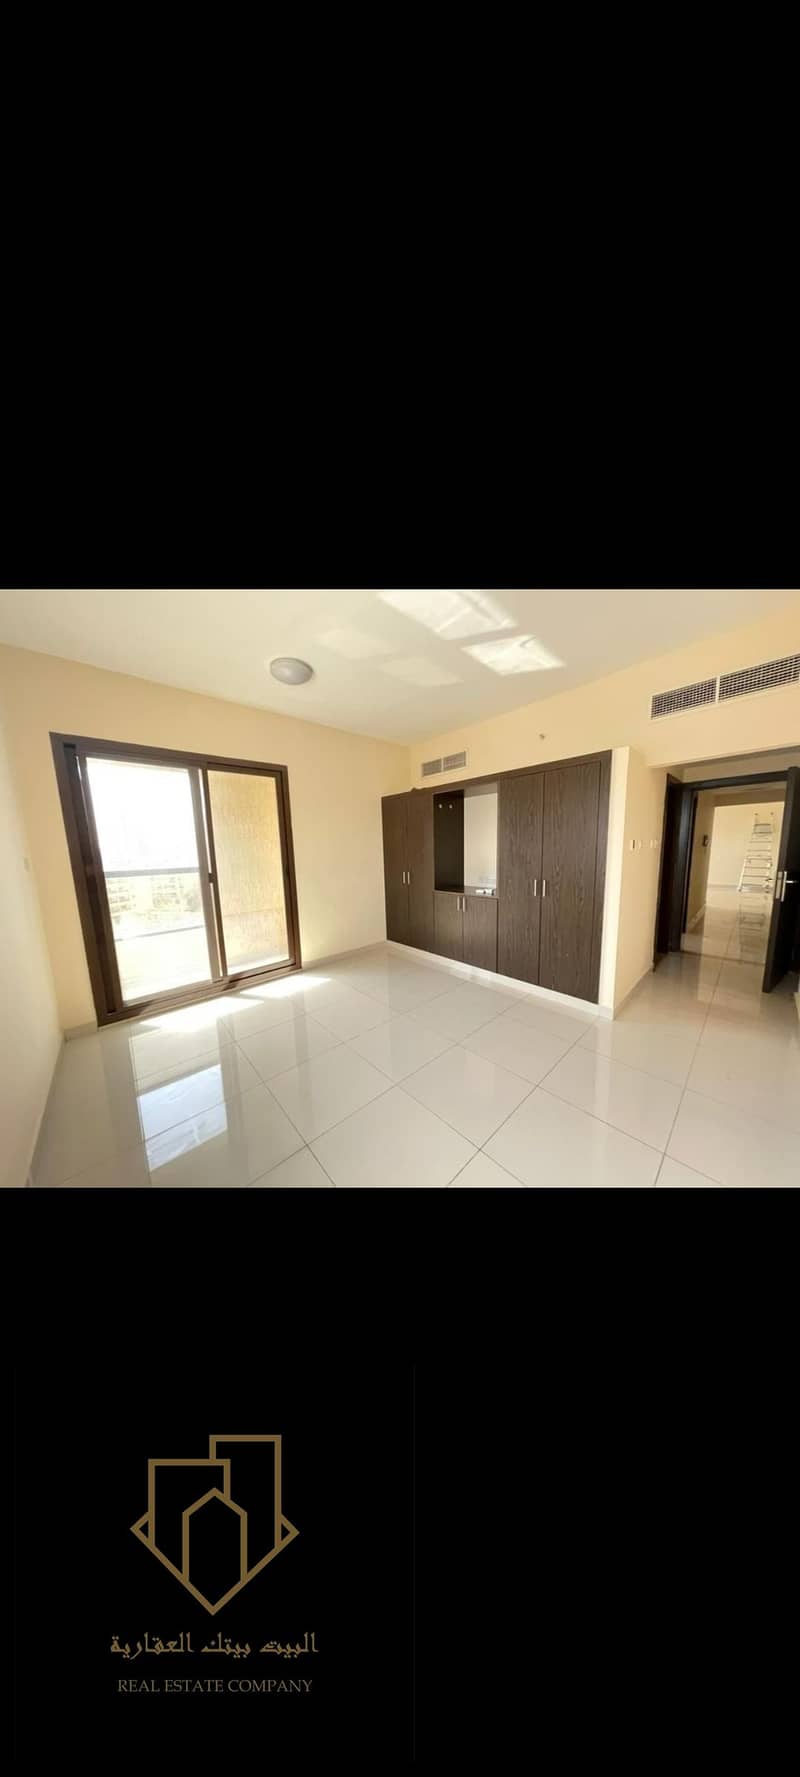 Enjoy comfort and luxury in this apartment with large space and luxurious finishes. The apartment consists of two rooms and a hall, featuring built-in wardrobes and a prime location close to all services and ease. Moving to Sharjah and Dubai